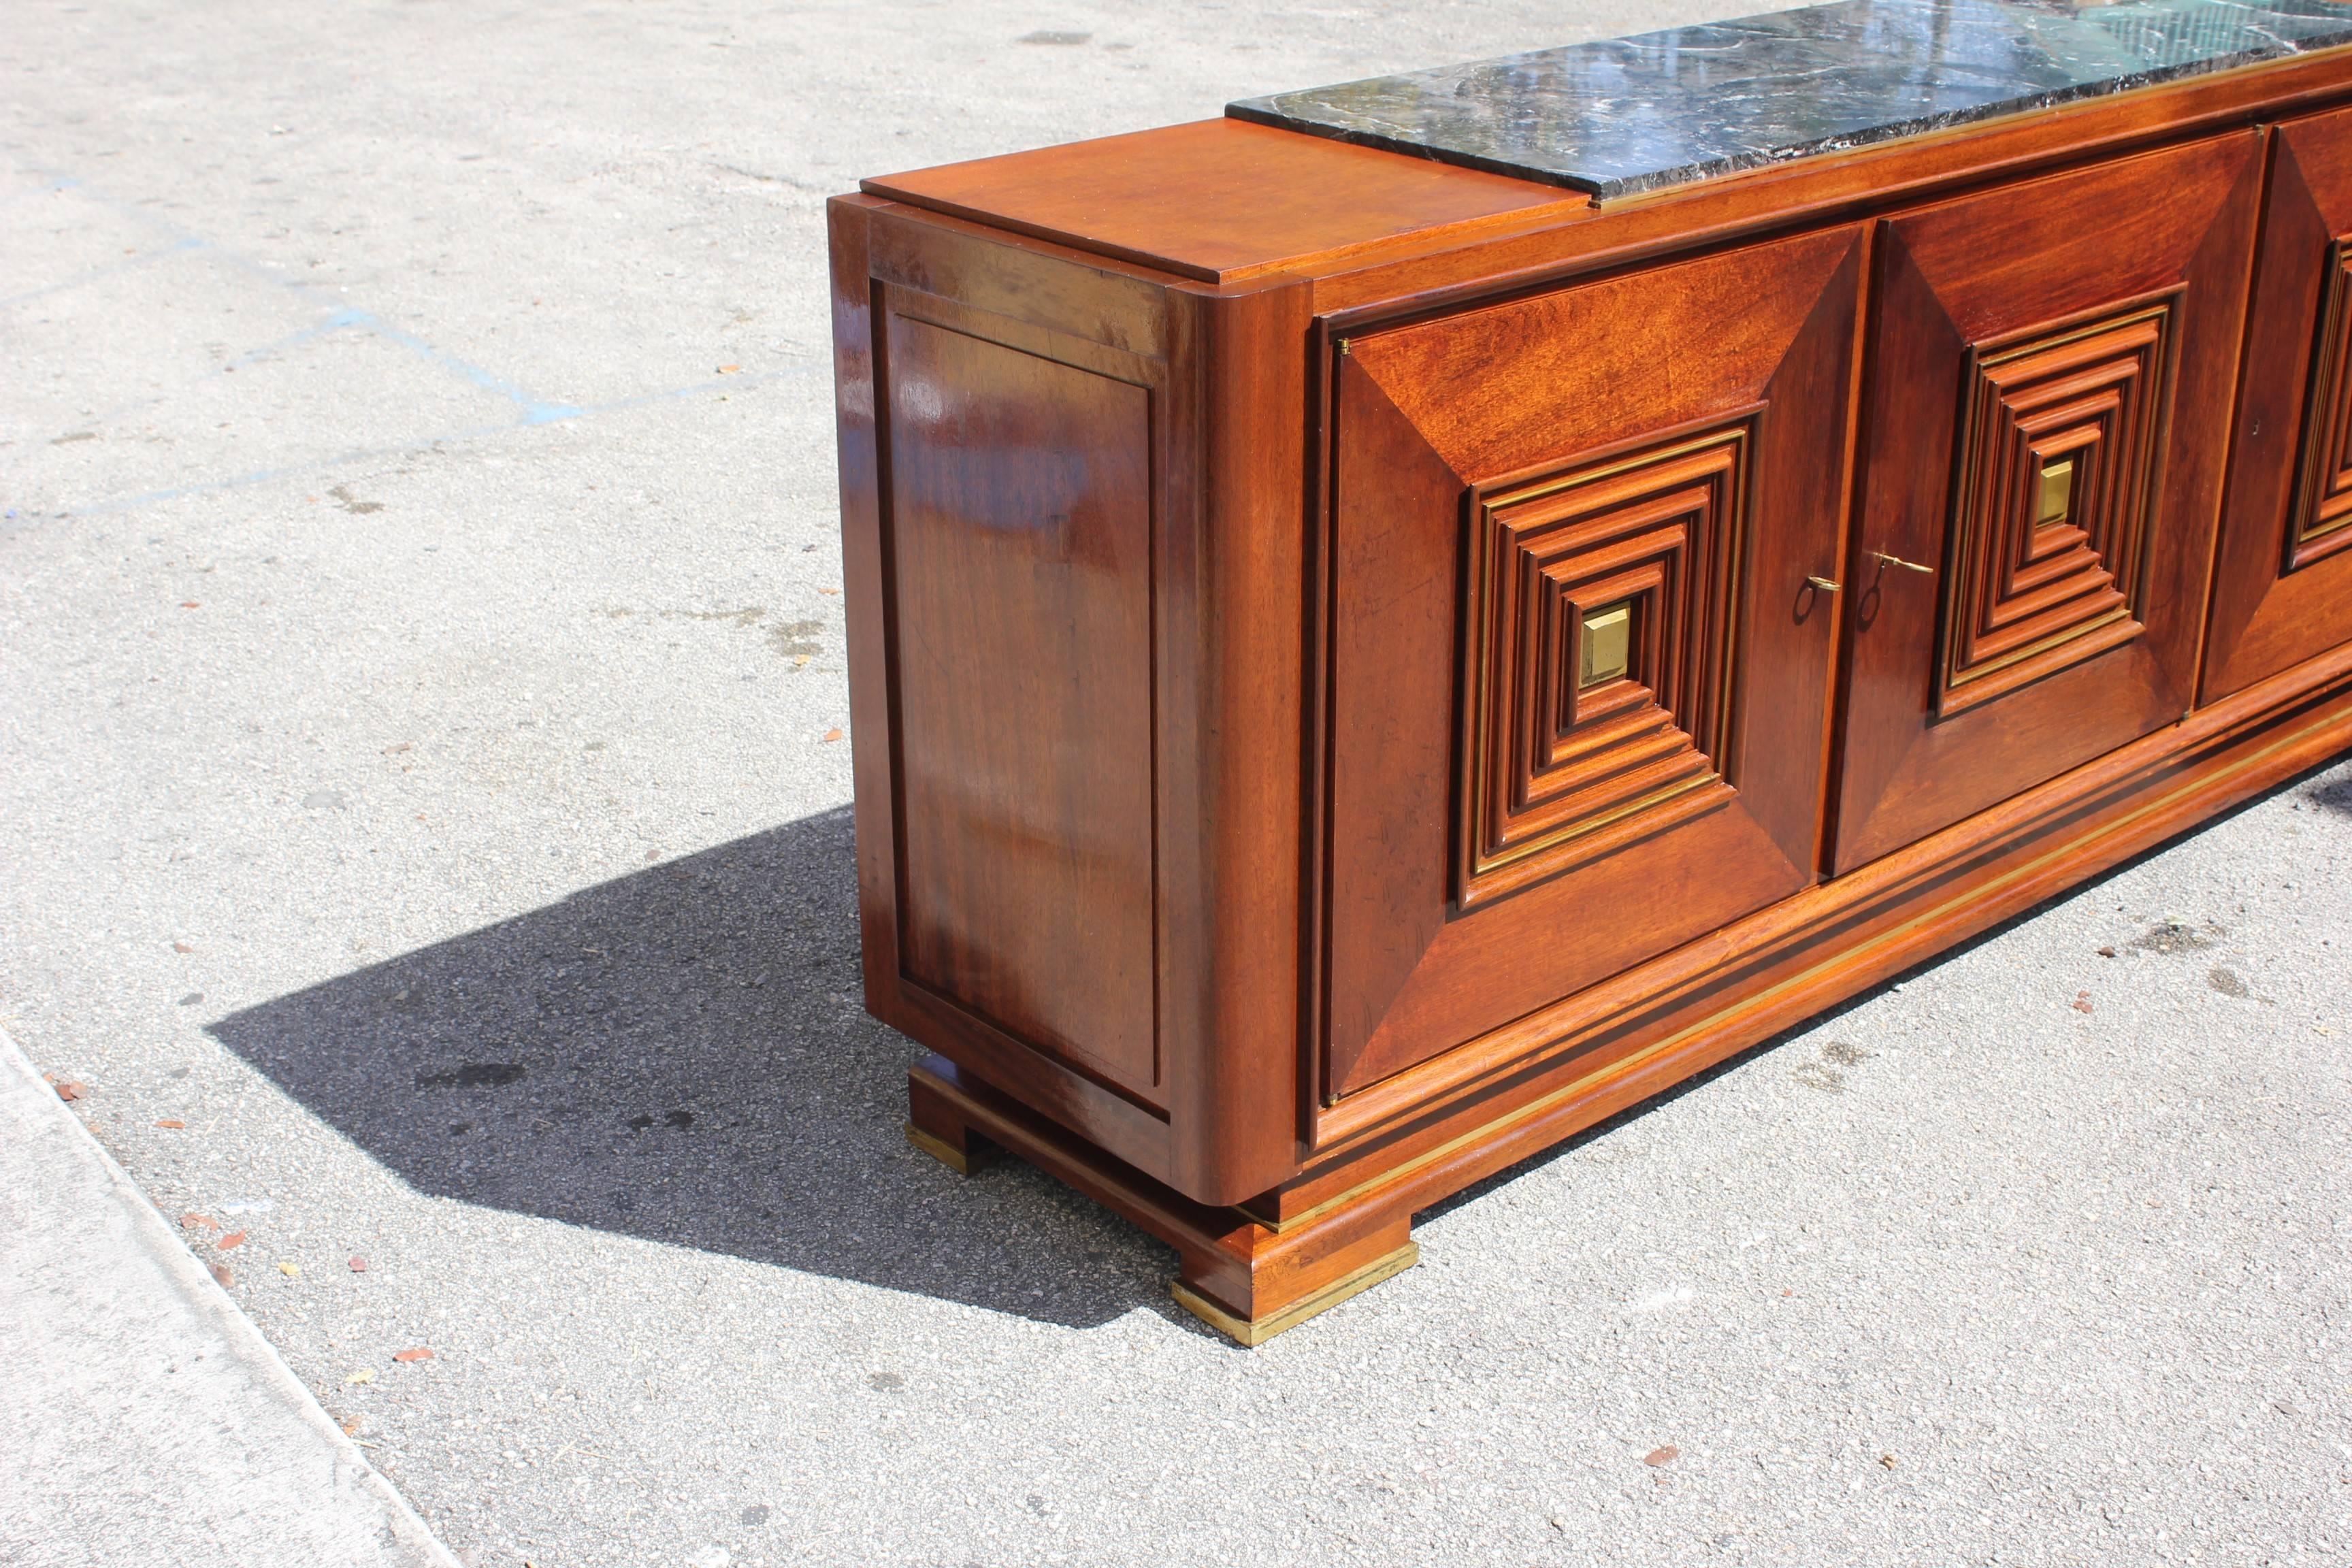 Master piece French Art Deco solid mahogany sideboard or buffet marble top by the famed architect / designer Maxime Old. Documented in book 